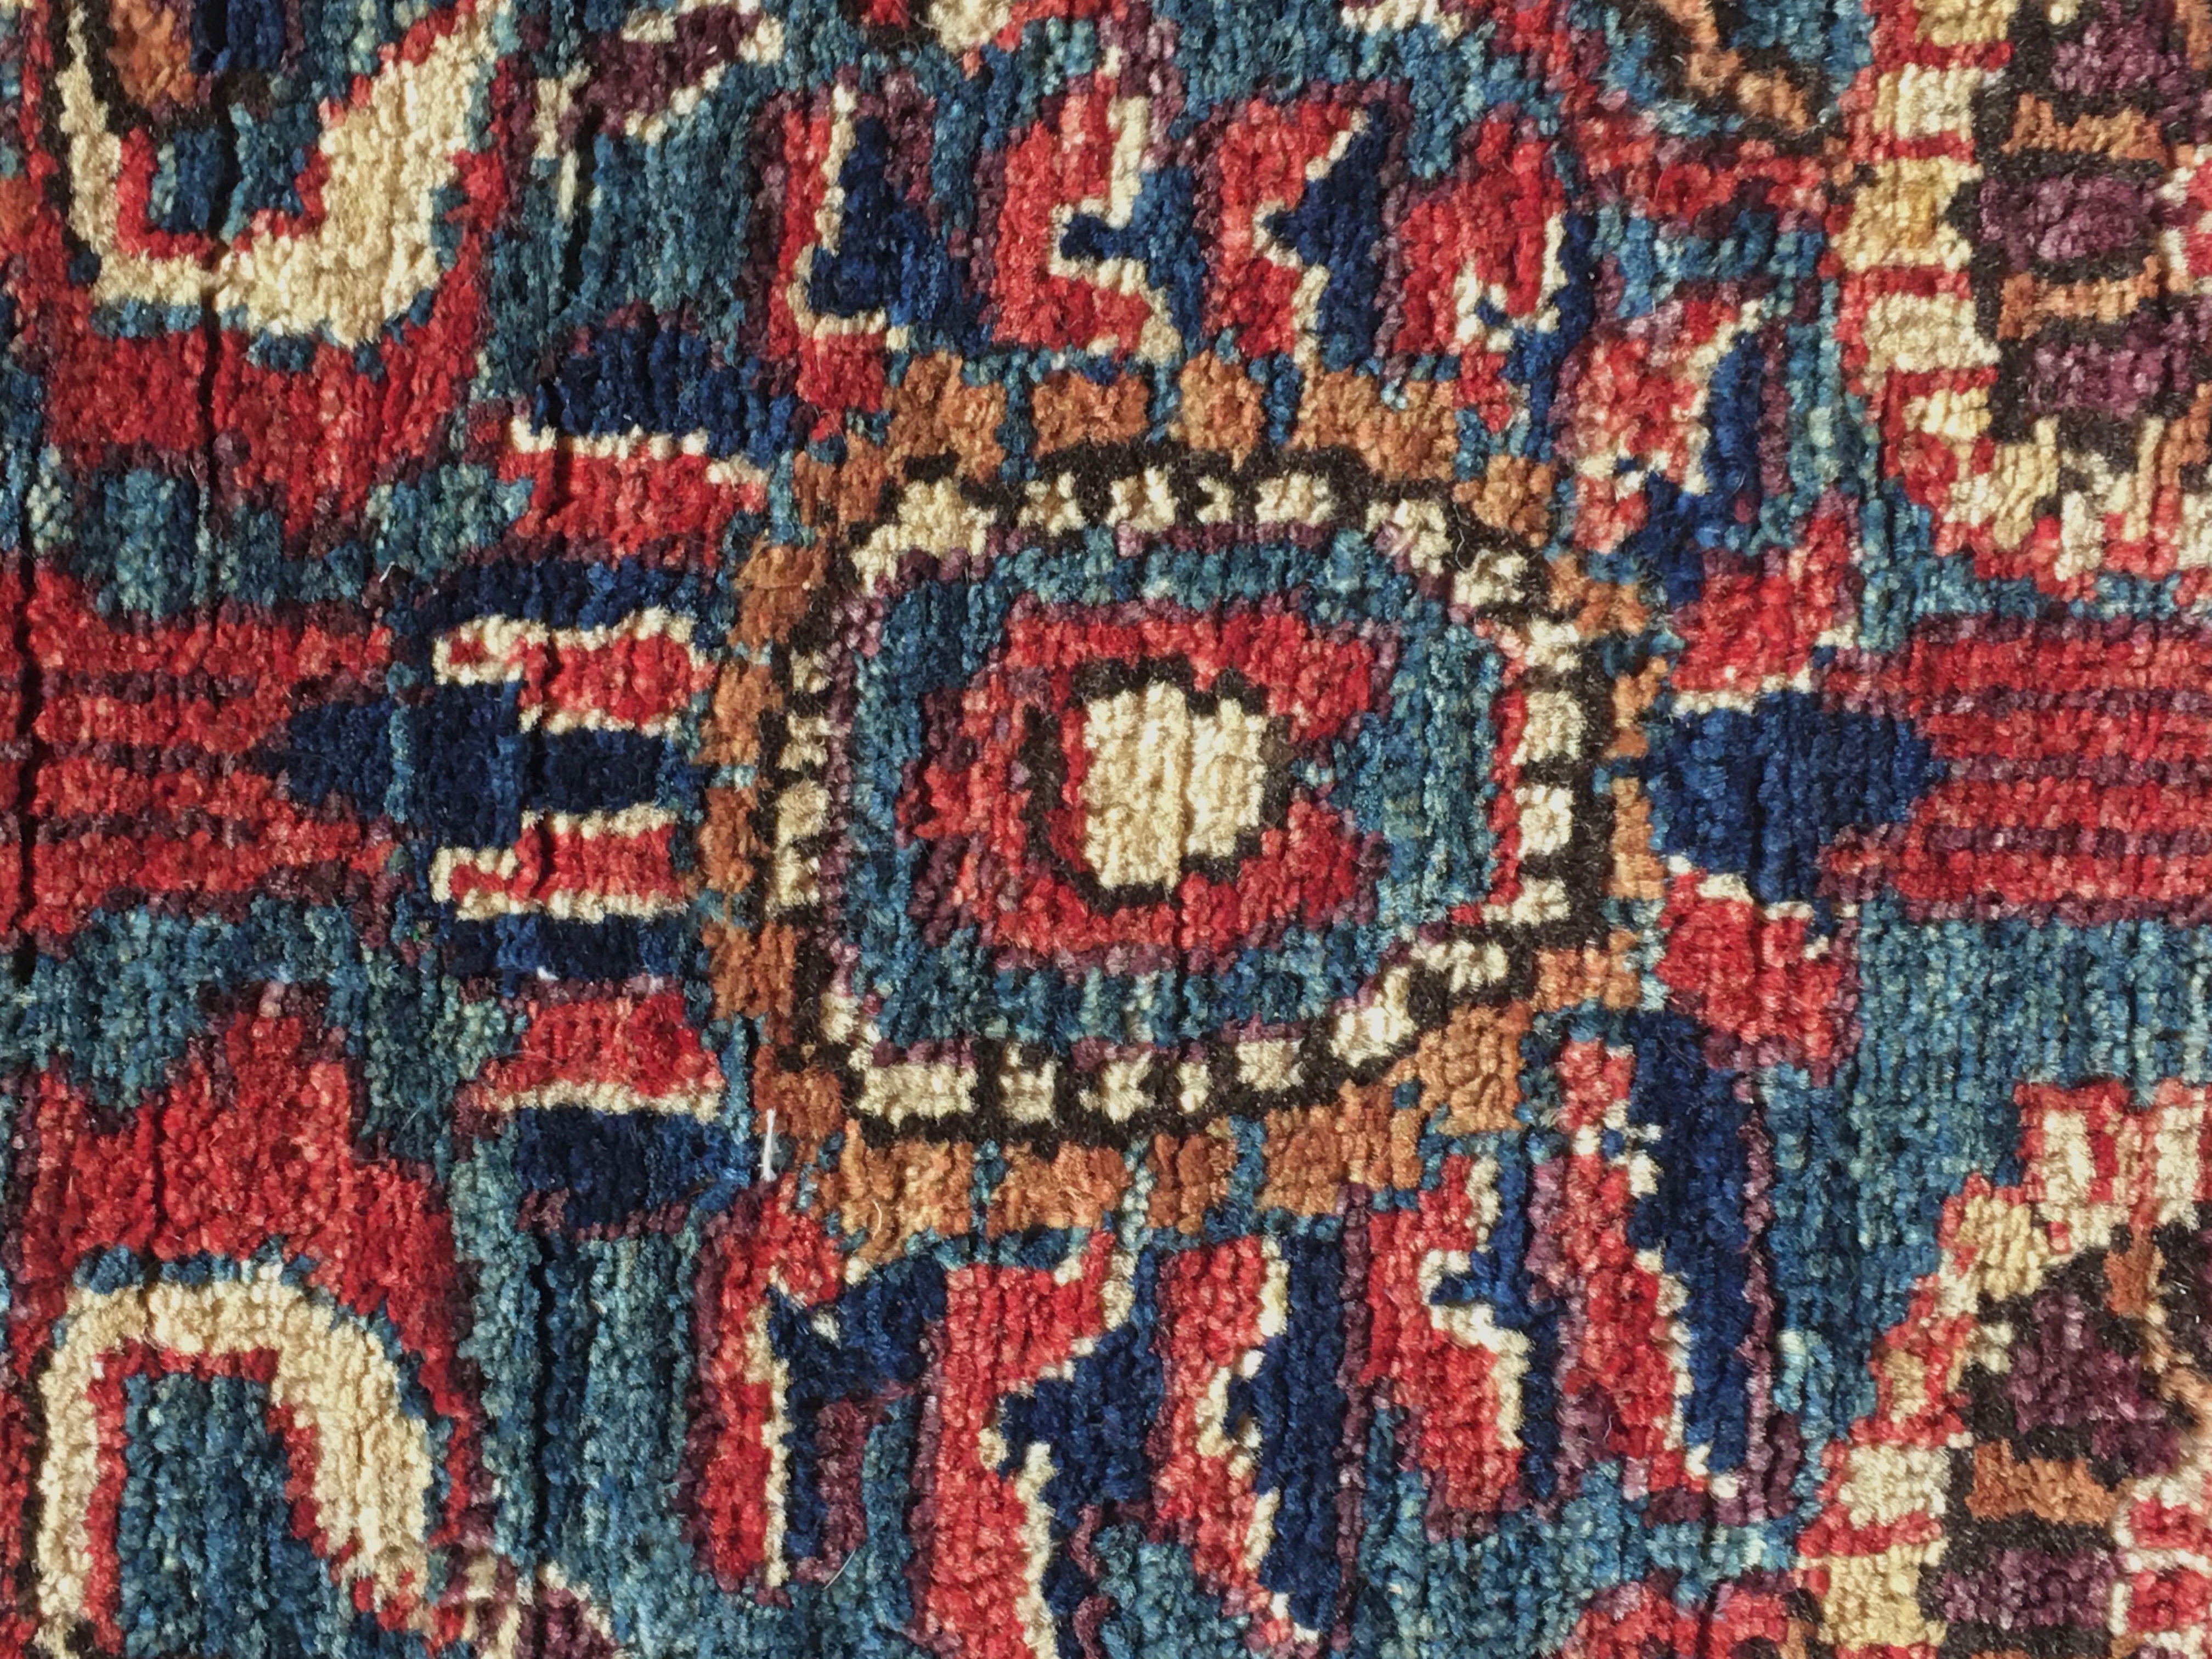 A detail of the center medallion on the rug